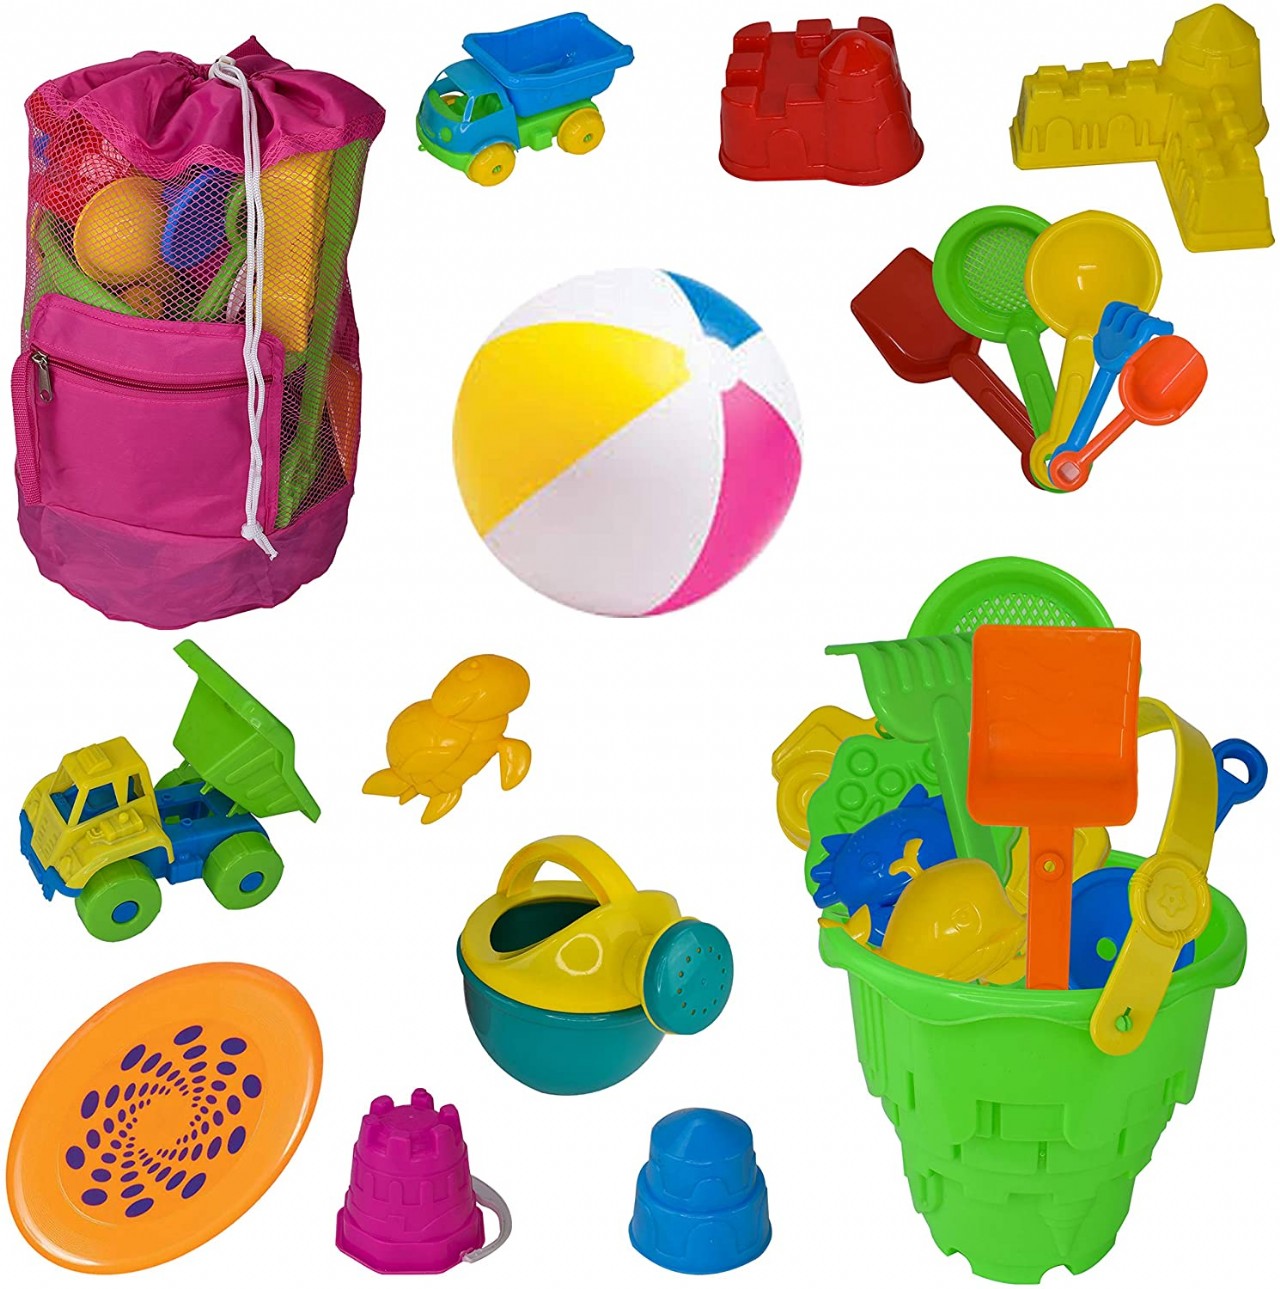 PB's Gifts Beach Toys for Kids, Sandcastle Mold Complete Sand Toy Set Including Large Mesh Beach Bag